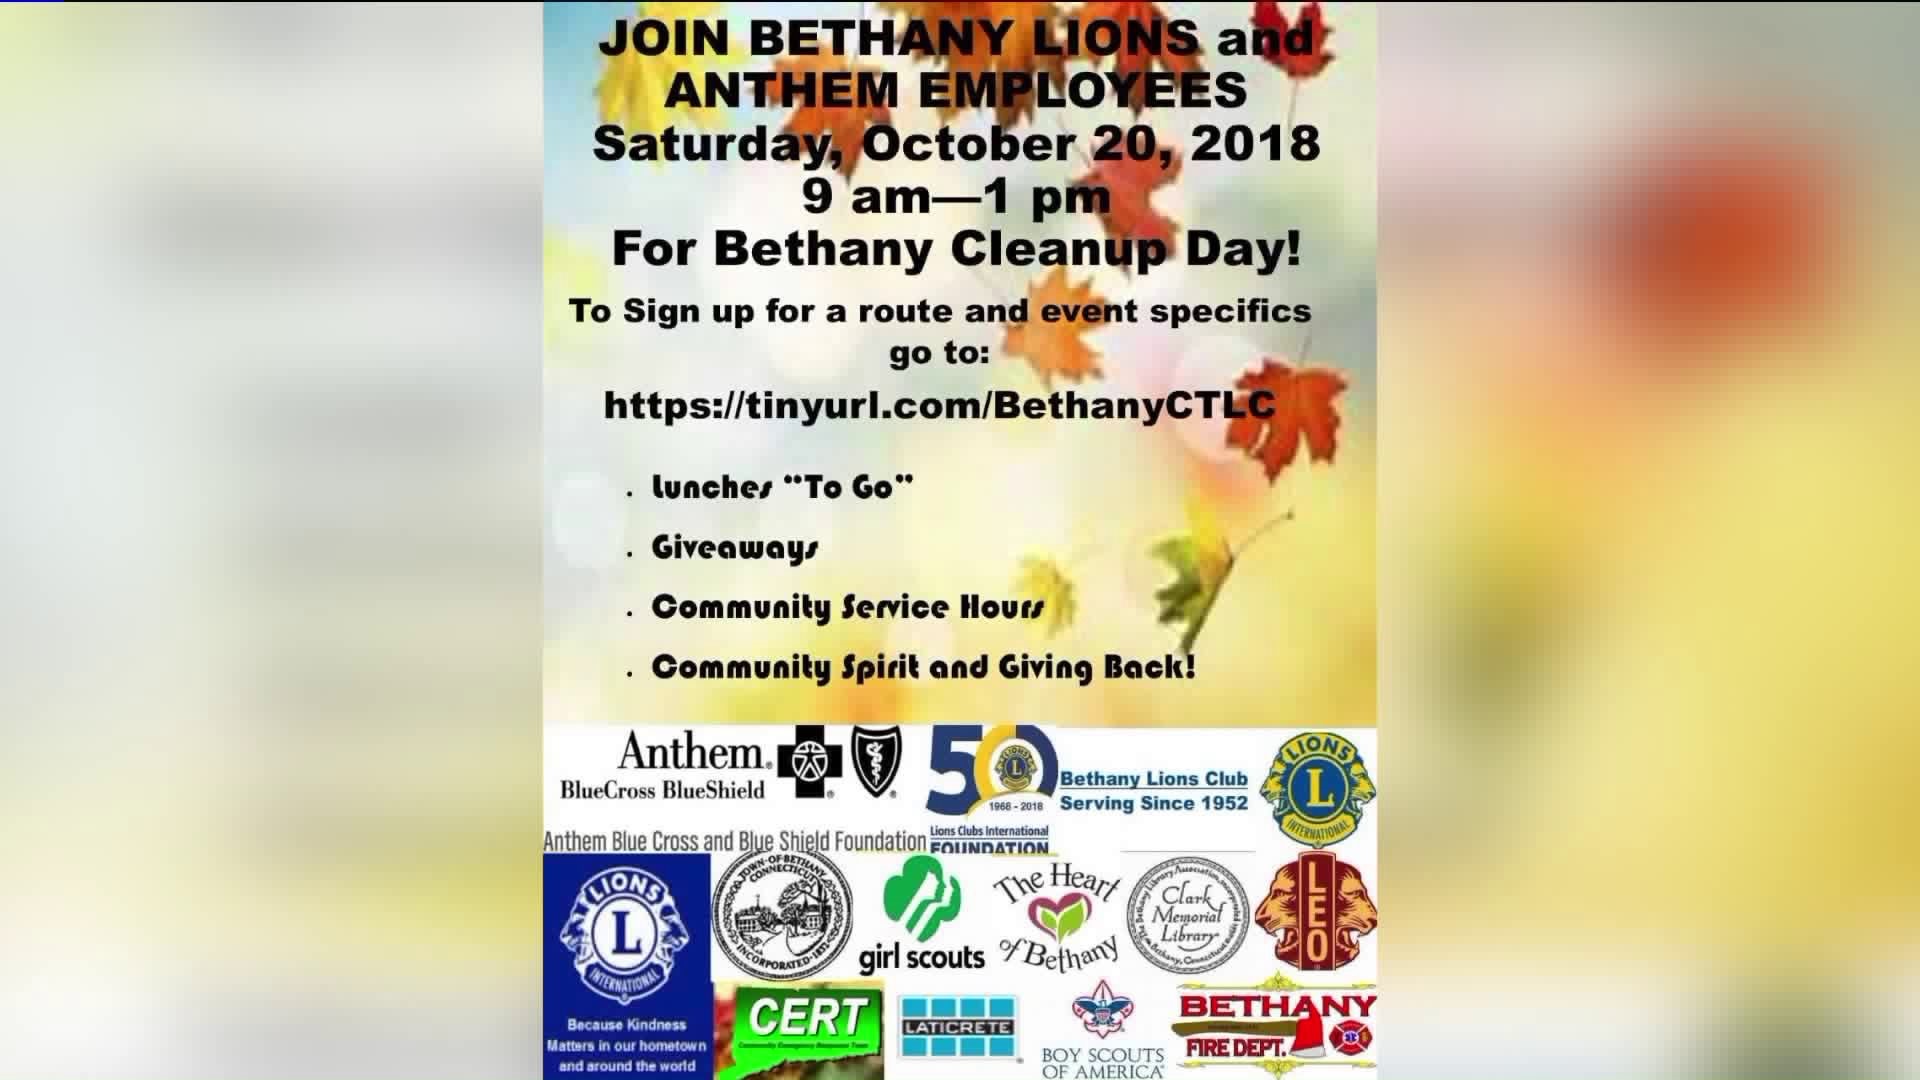 Anthem and Bethany Lions club to host `Bethany Fall Clean Up Day 2018` October 20